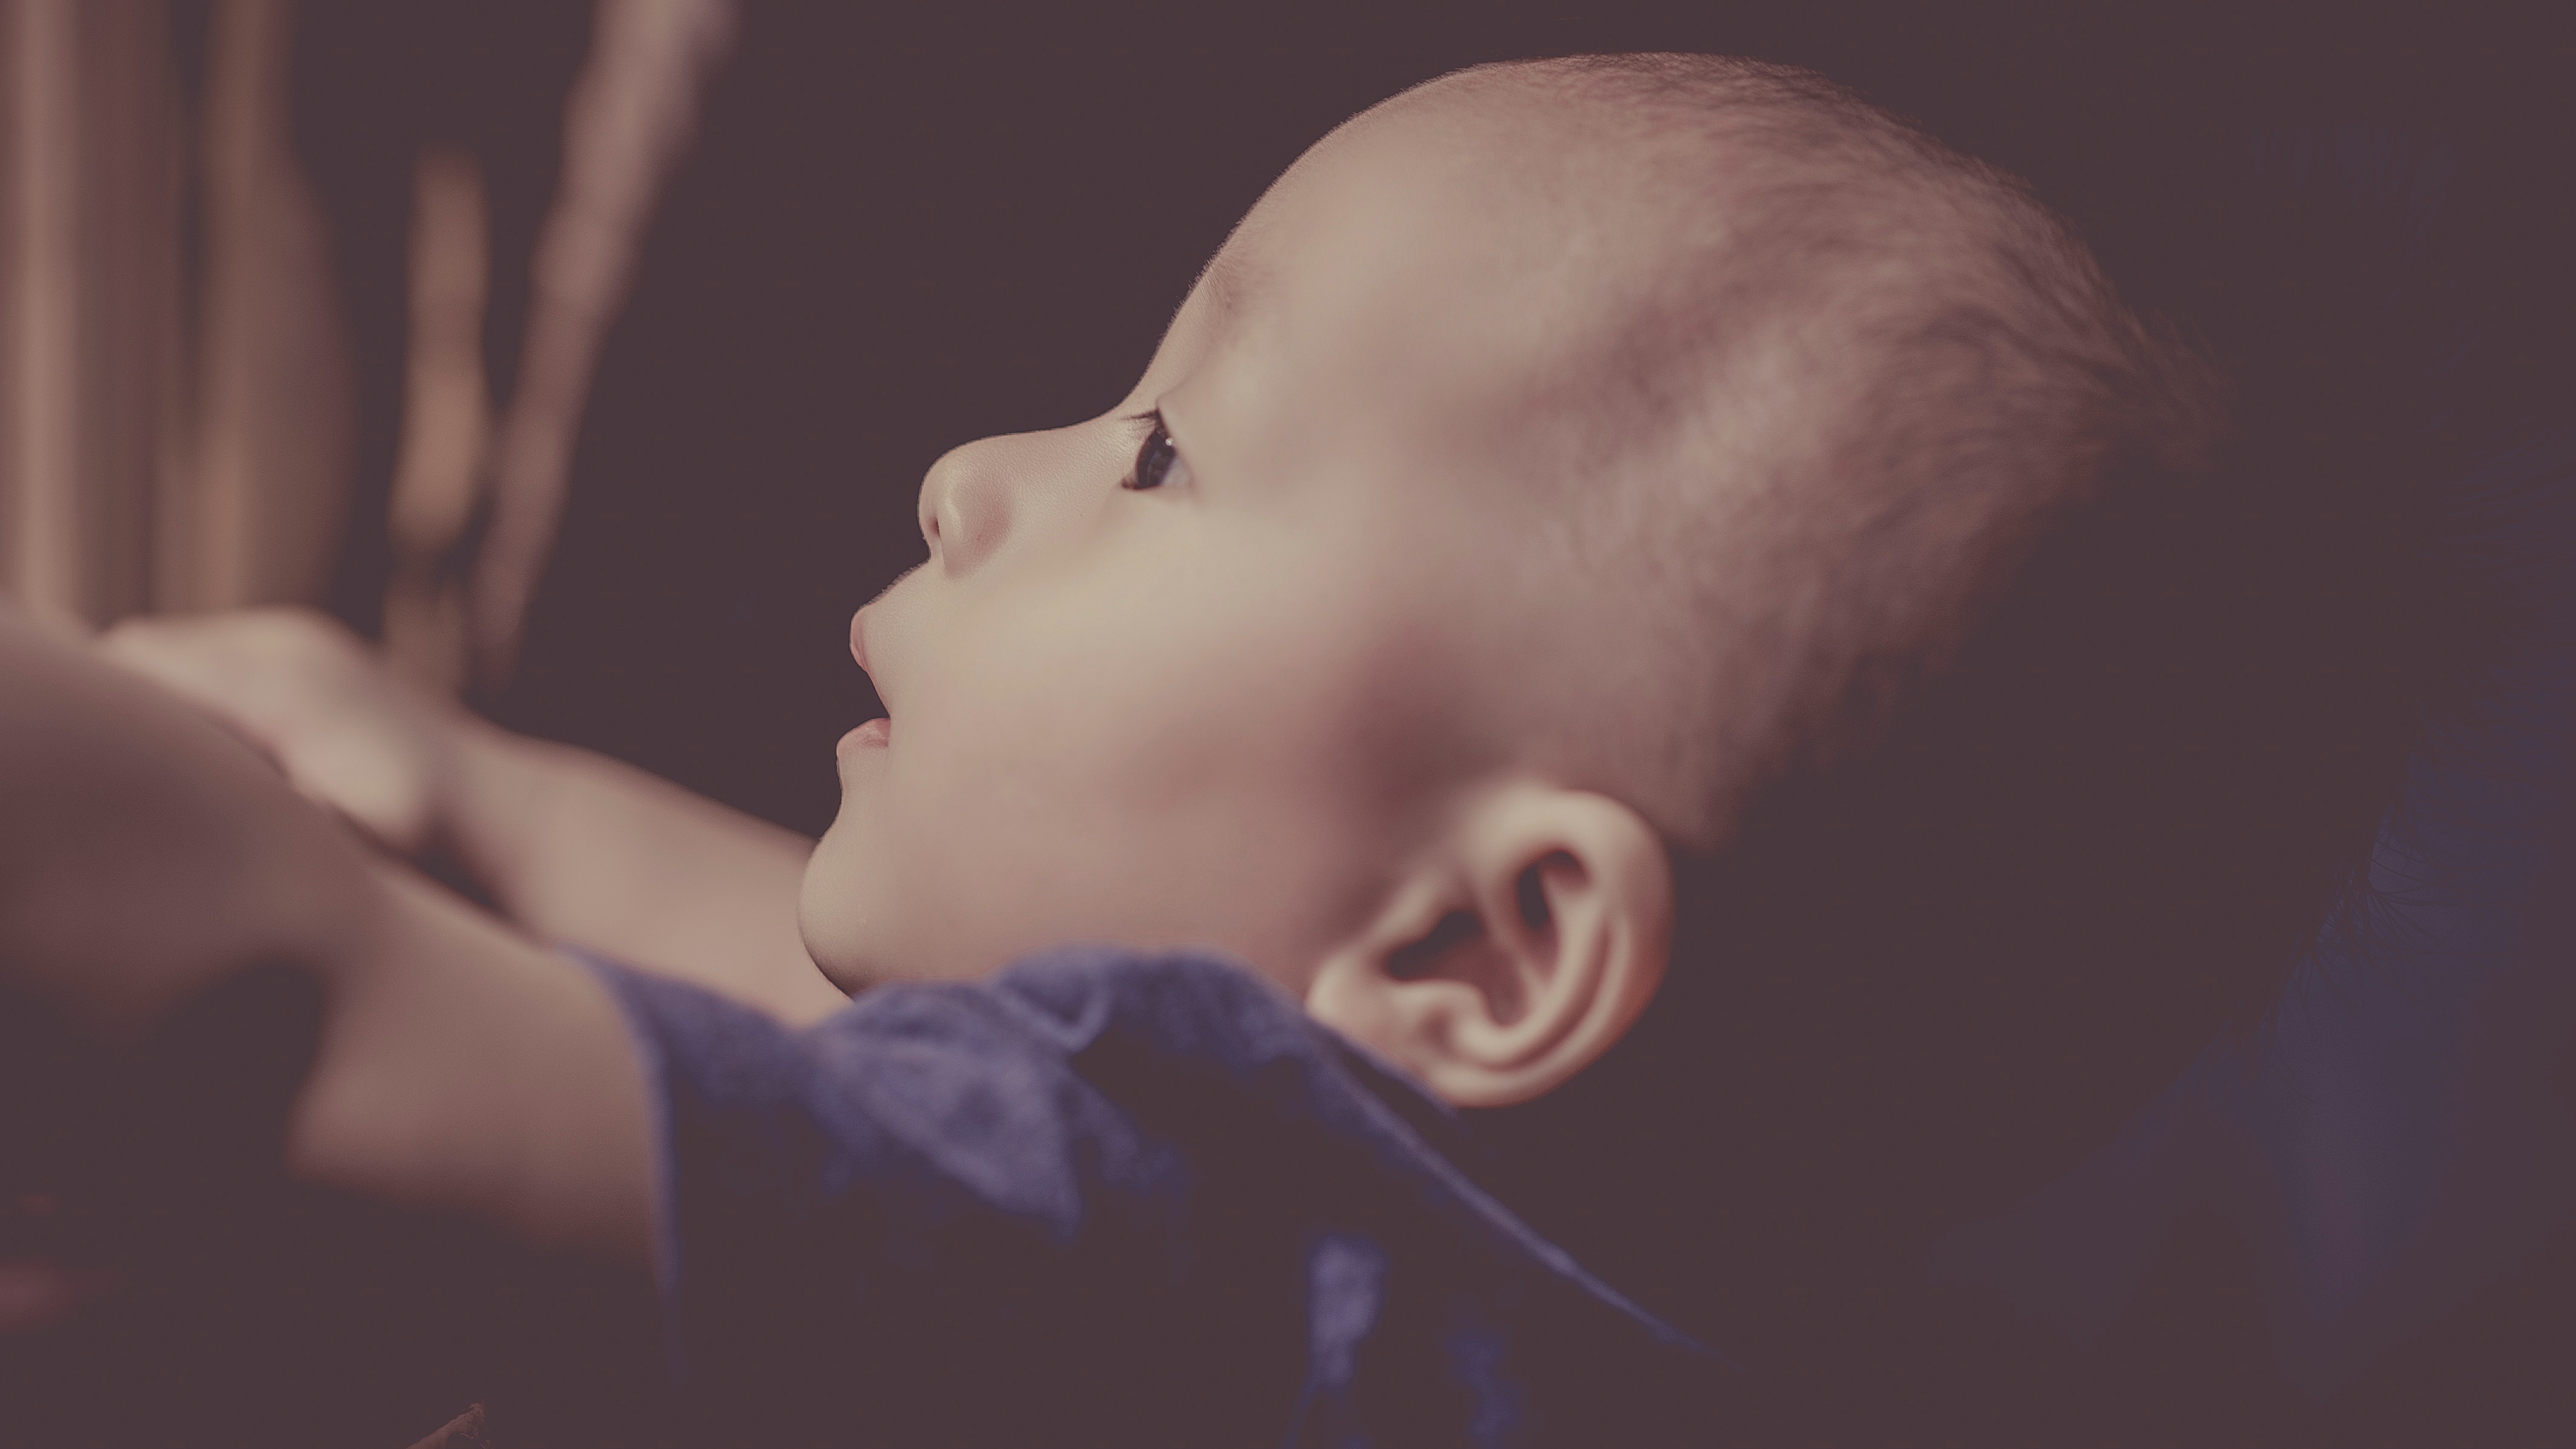 Baby Wearing Blue Shirt, Baby, Blurred background, Child, Close -up, HQ Photo